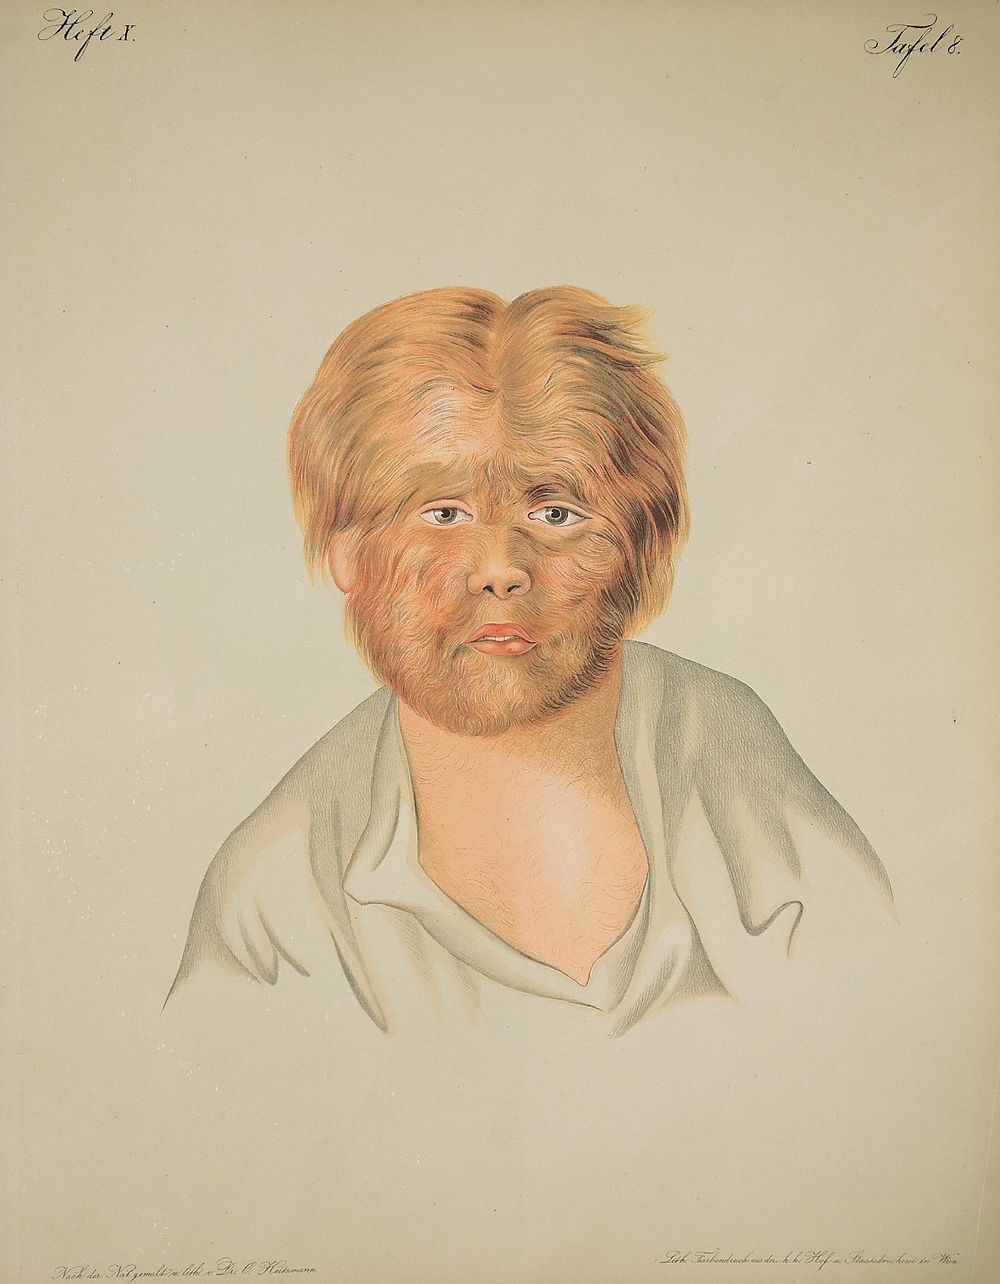 Hairy-faced boy. Image of a lithograph from Hebra's Atlas, pt. 10, pl. 8, showing a boy whose face is completely covered in…